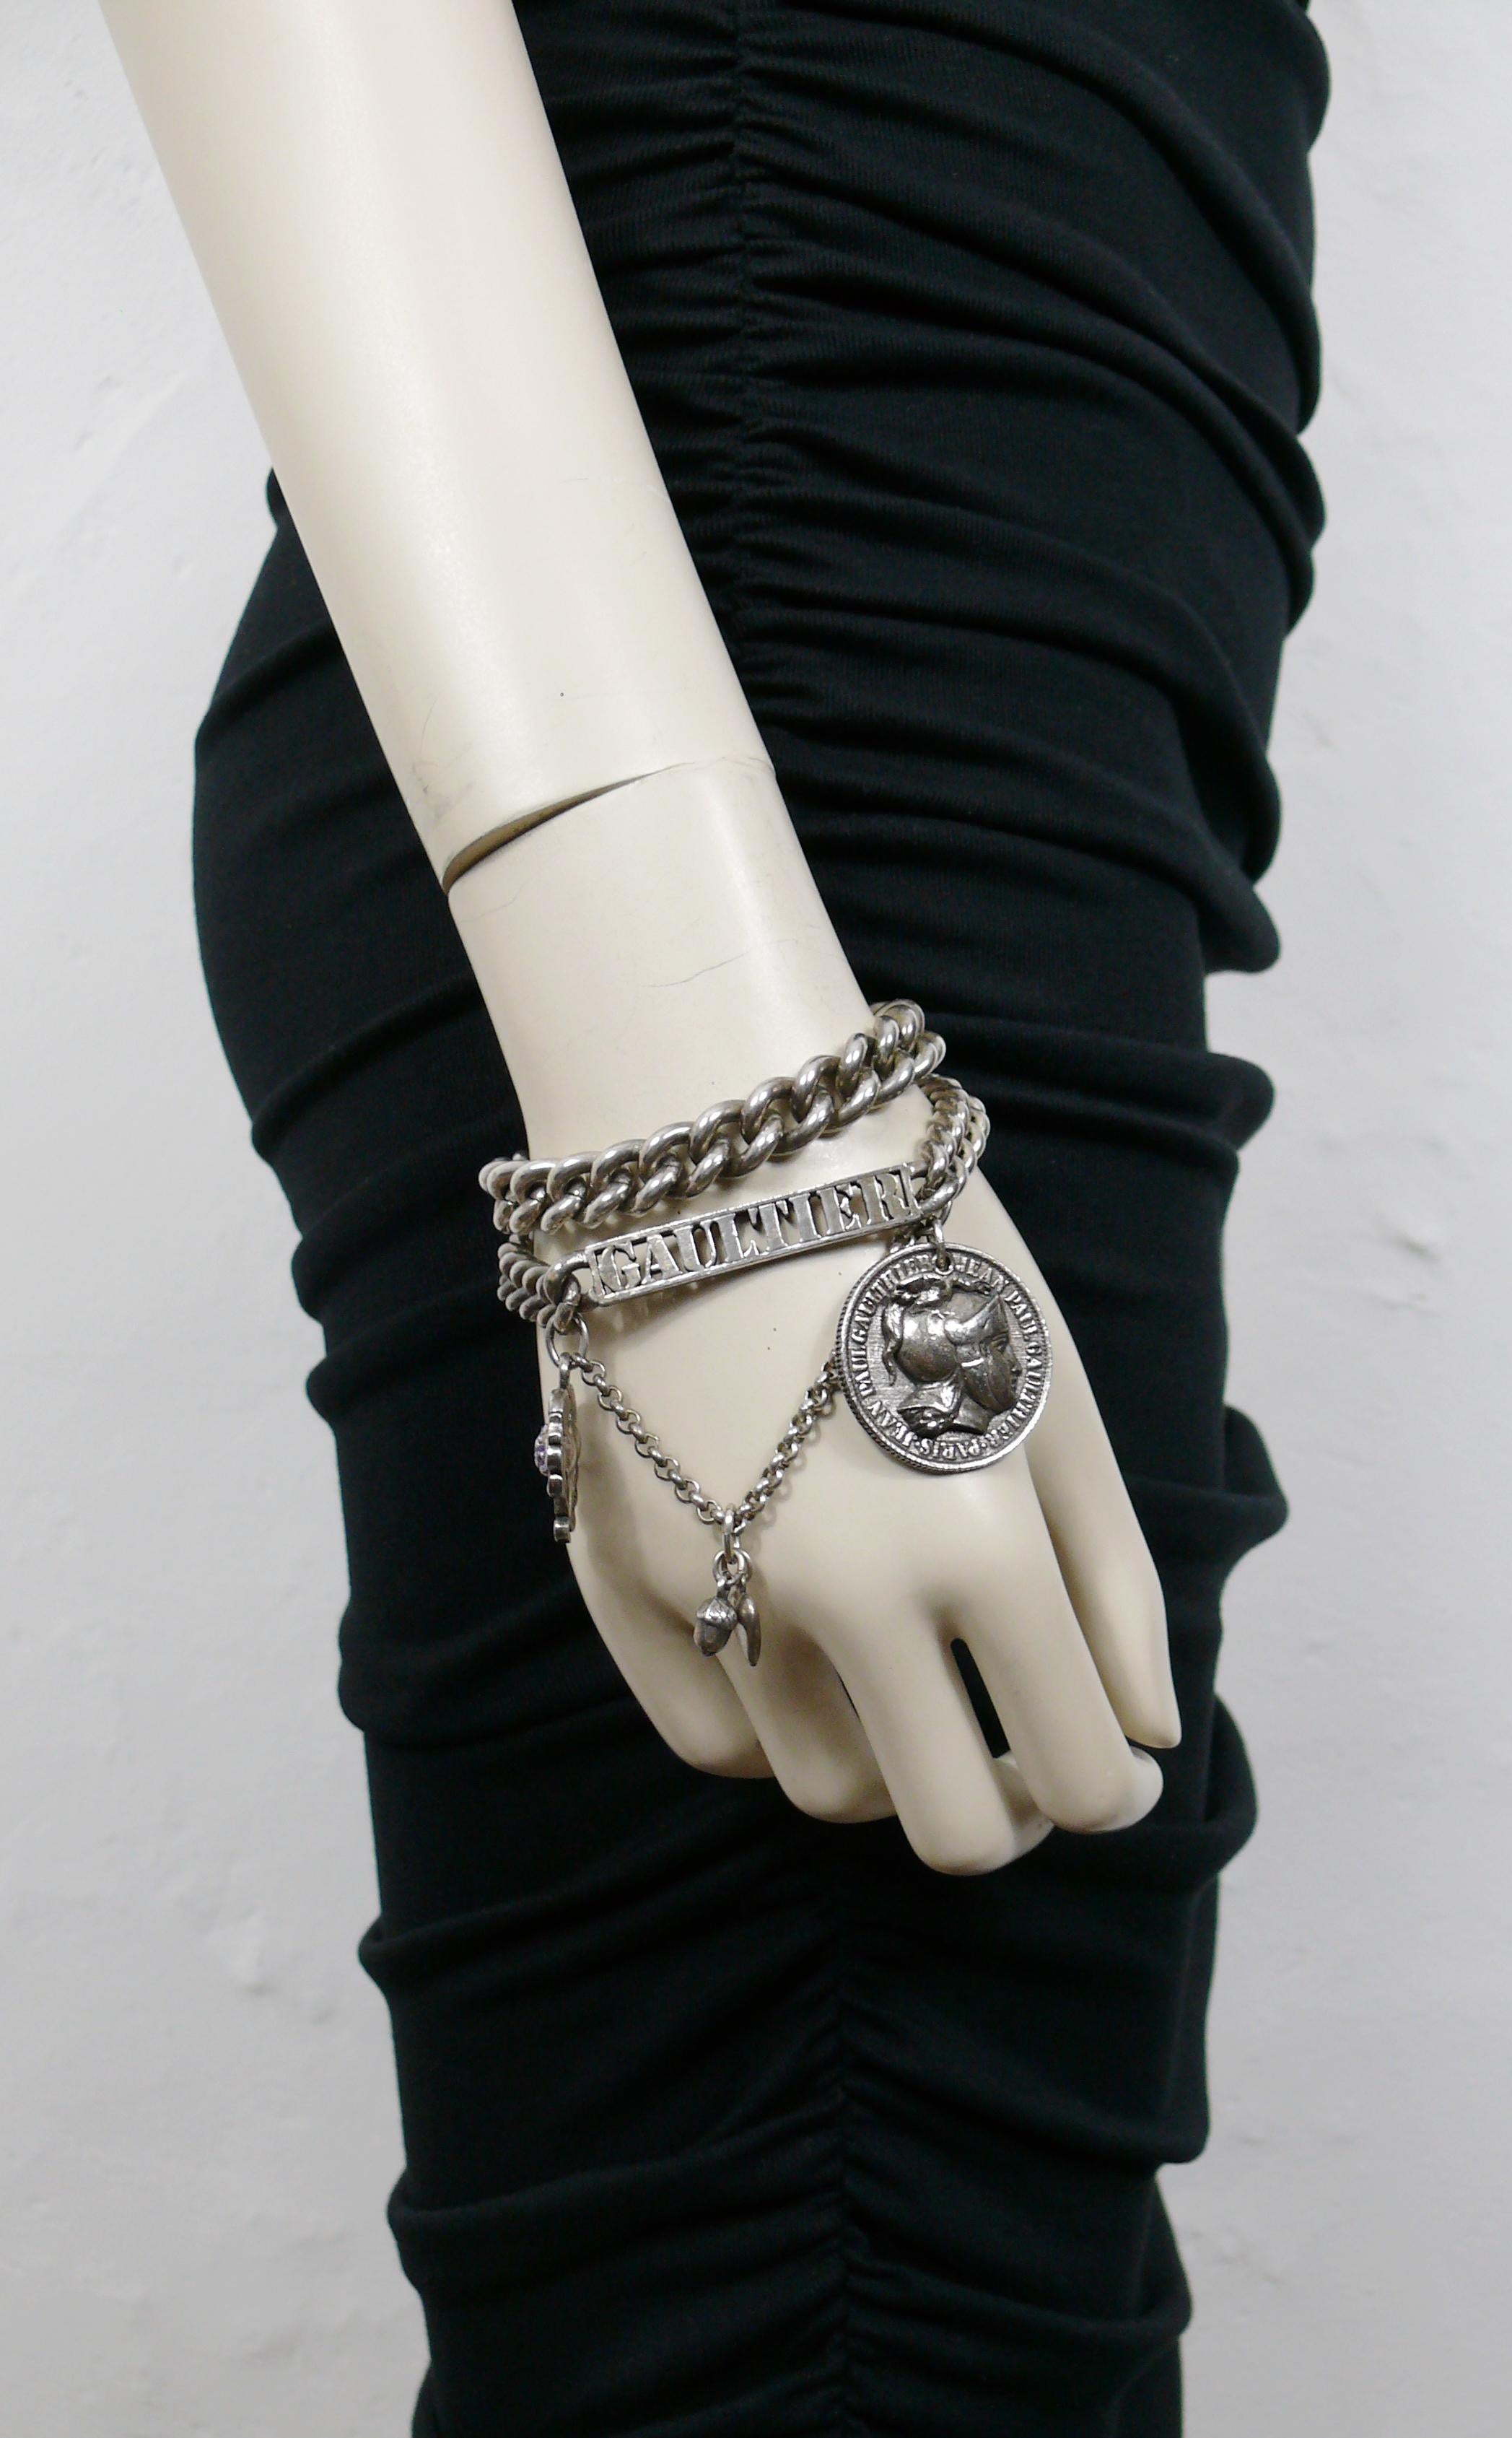 JEAN PAUL GAULTIER antiqued silver toned curb chain bracelet featuring cut-out GAULTIER ID tag and charms  : jewelled thistles, heart, acorn, Roman centurion coin.

Silver tone metal hardware.
Antiqued patina.

Secure hoop clasp closure.

Embossed